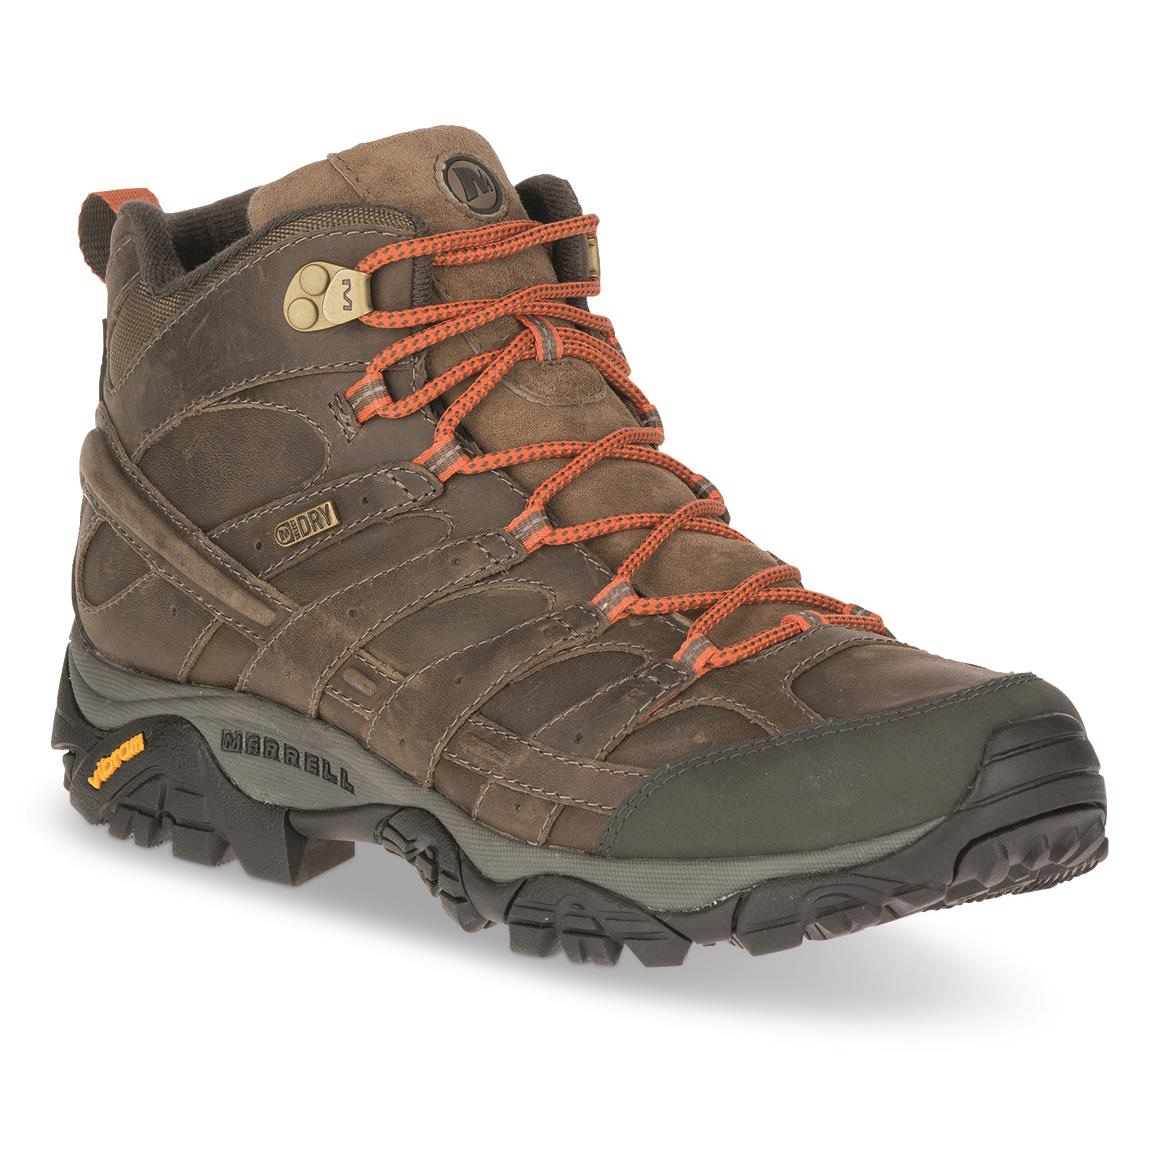 Merrell Men's Moab 2 Prime Mid Waterproof Hiking Boots, Canteen